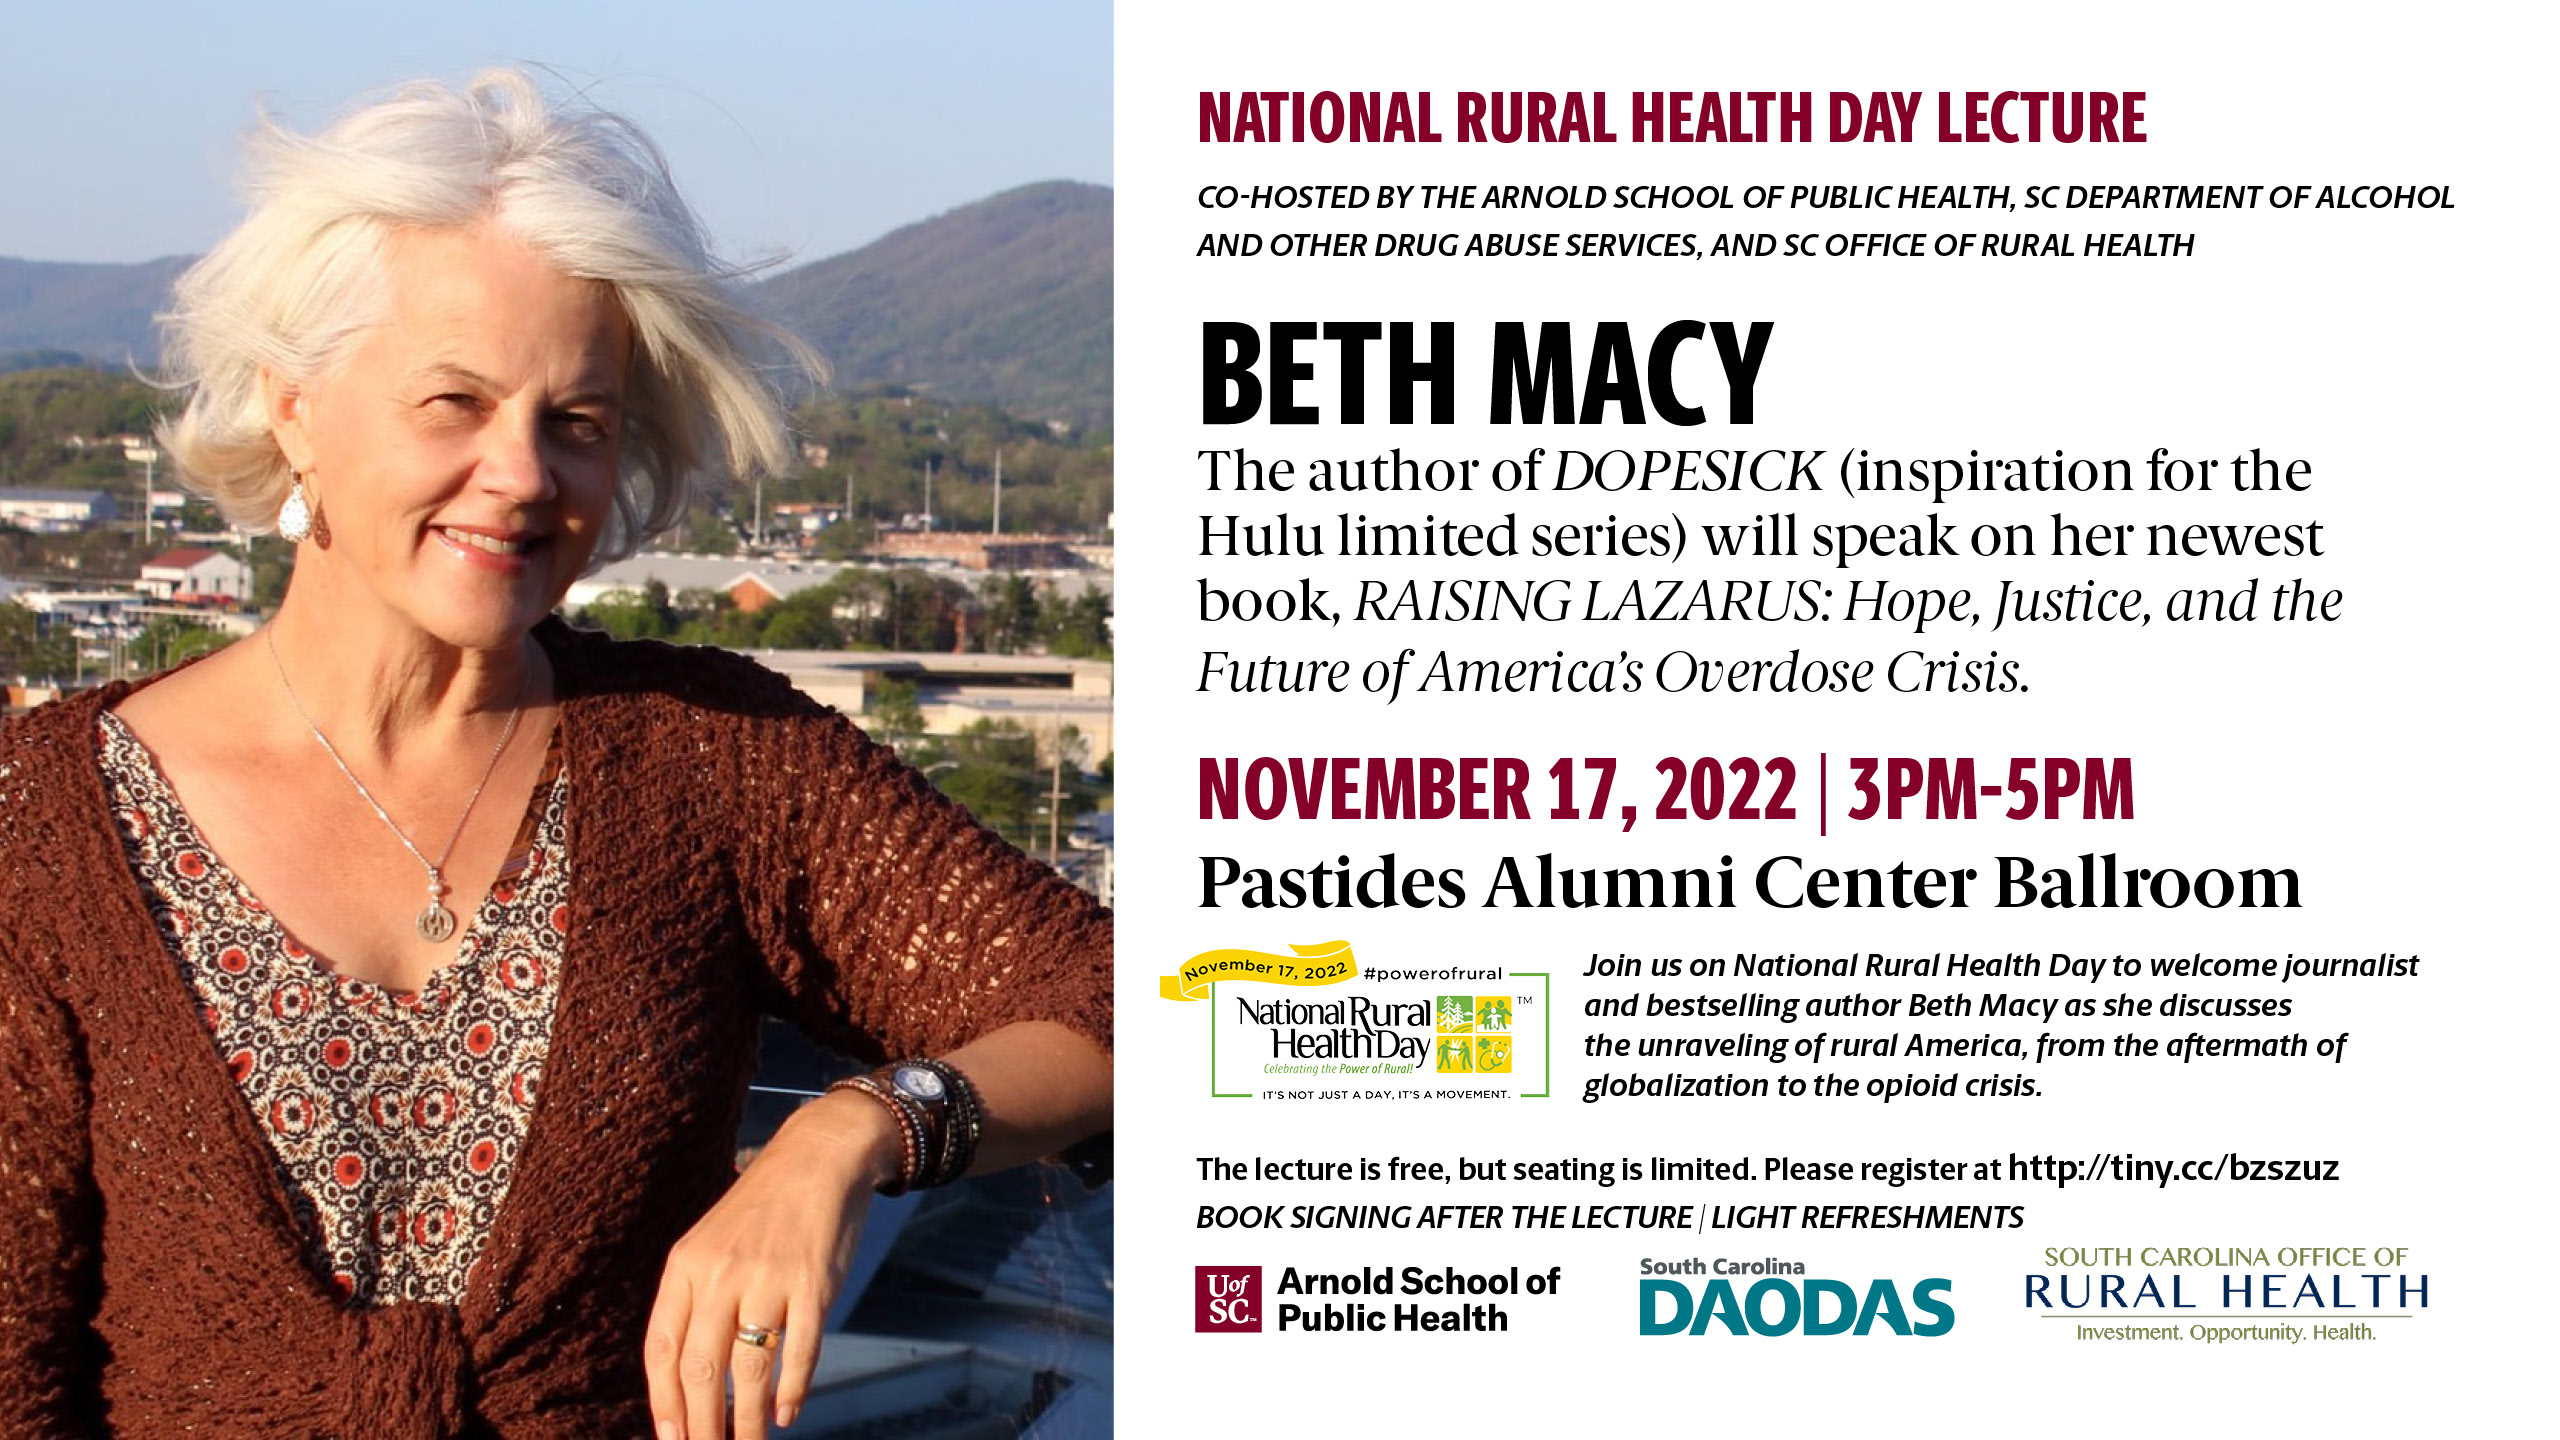 National rural health day lecture November 17, 2022